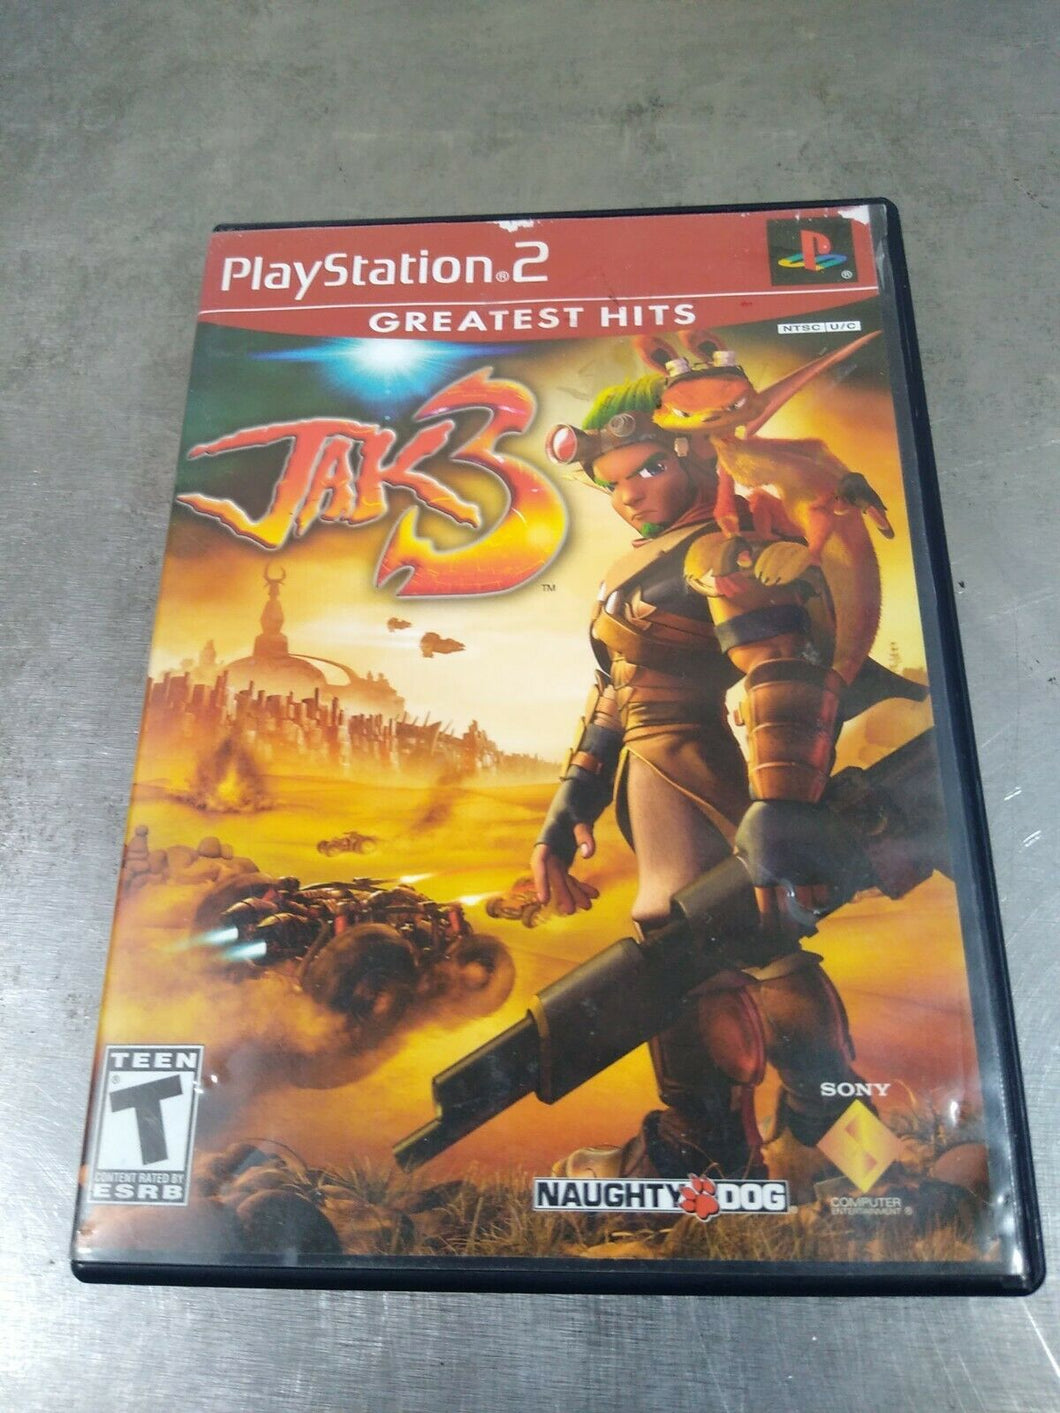 Jak 3 Greatest Hits PS2 (PRE-OWNED)